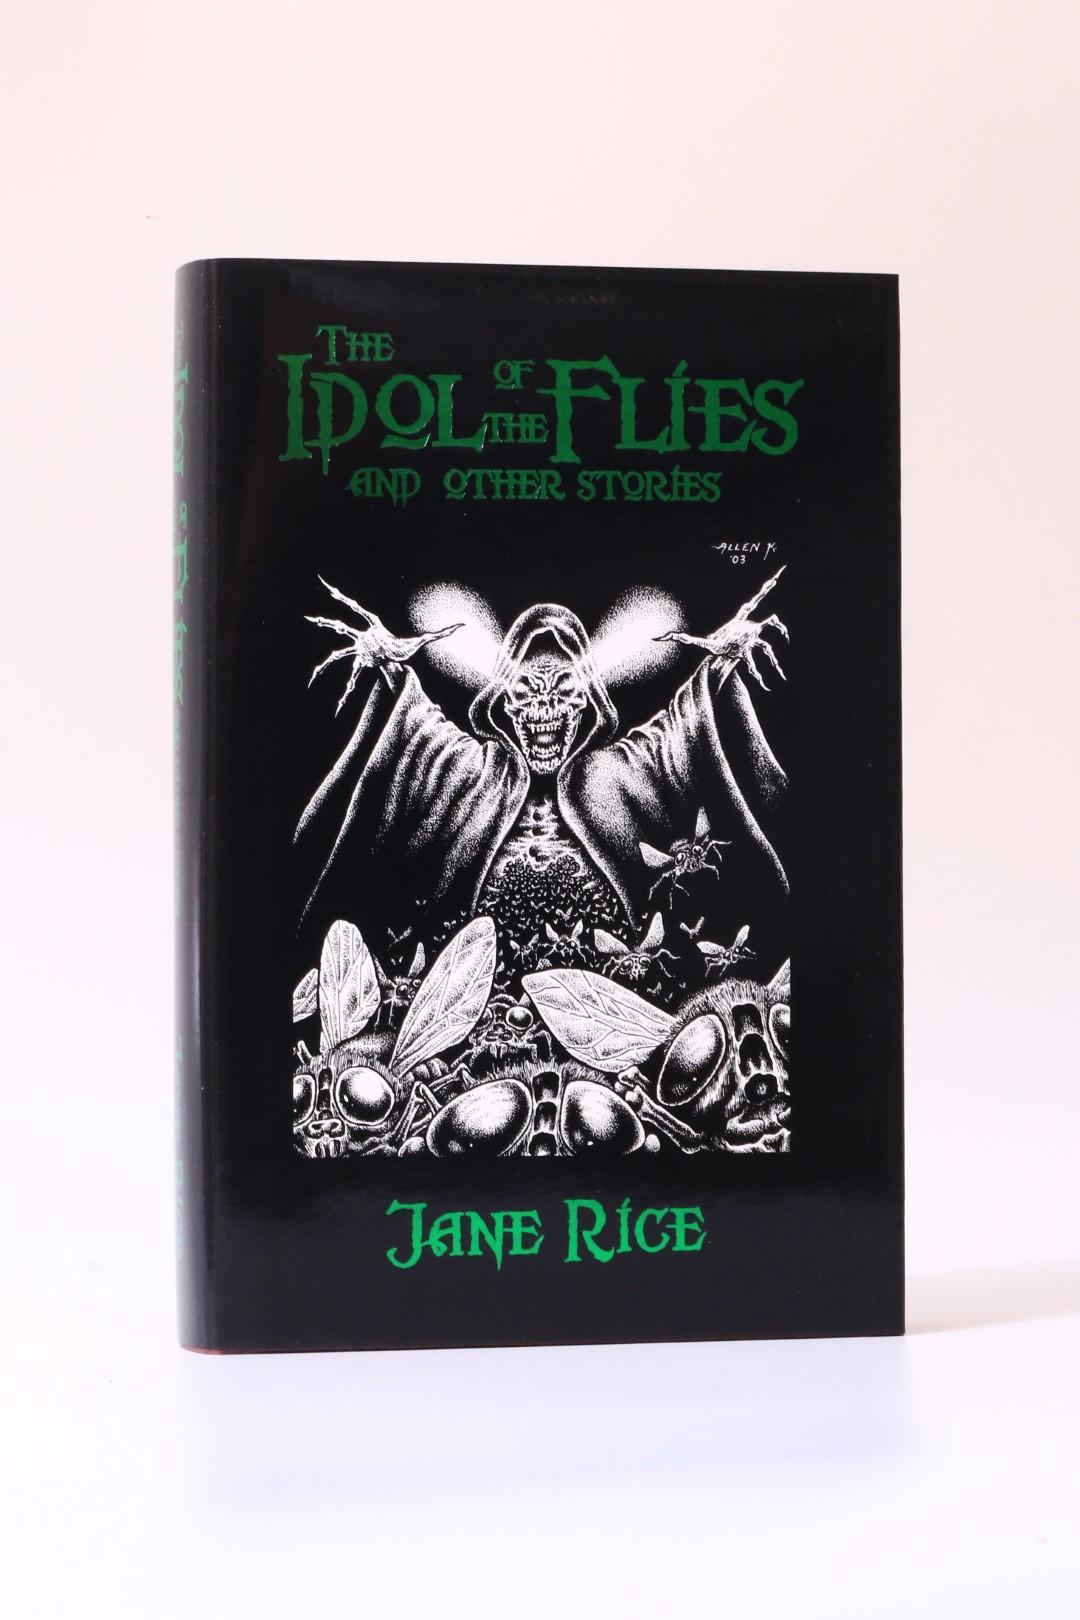 Jane Rice - The Idol of the Flies and Other Stories - Midnight House, 2003, First thus.